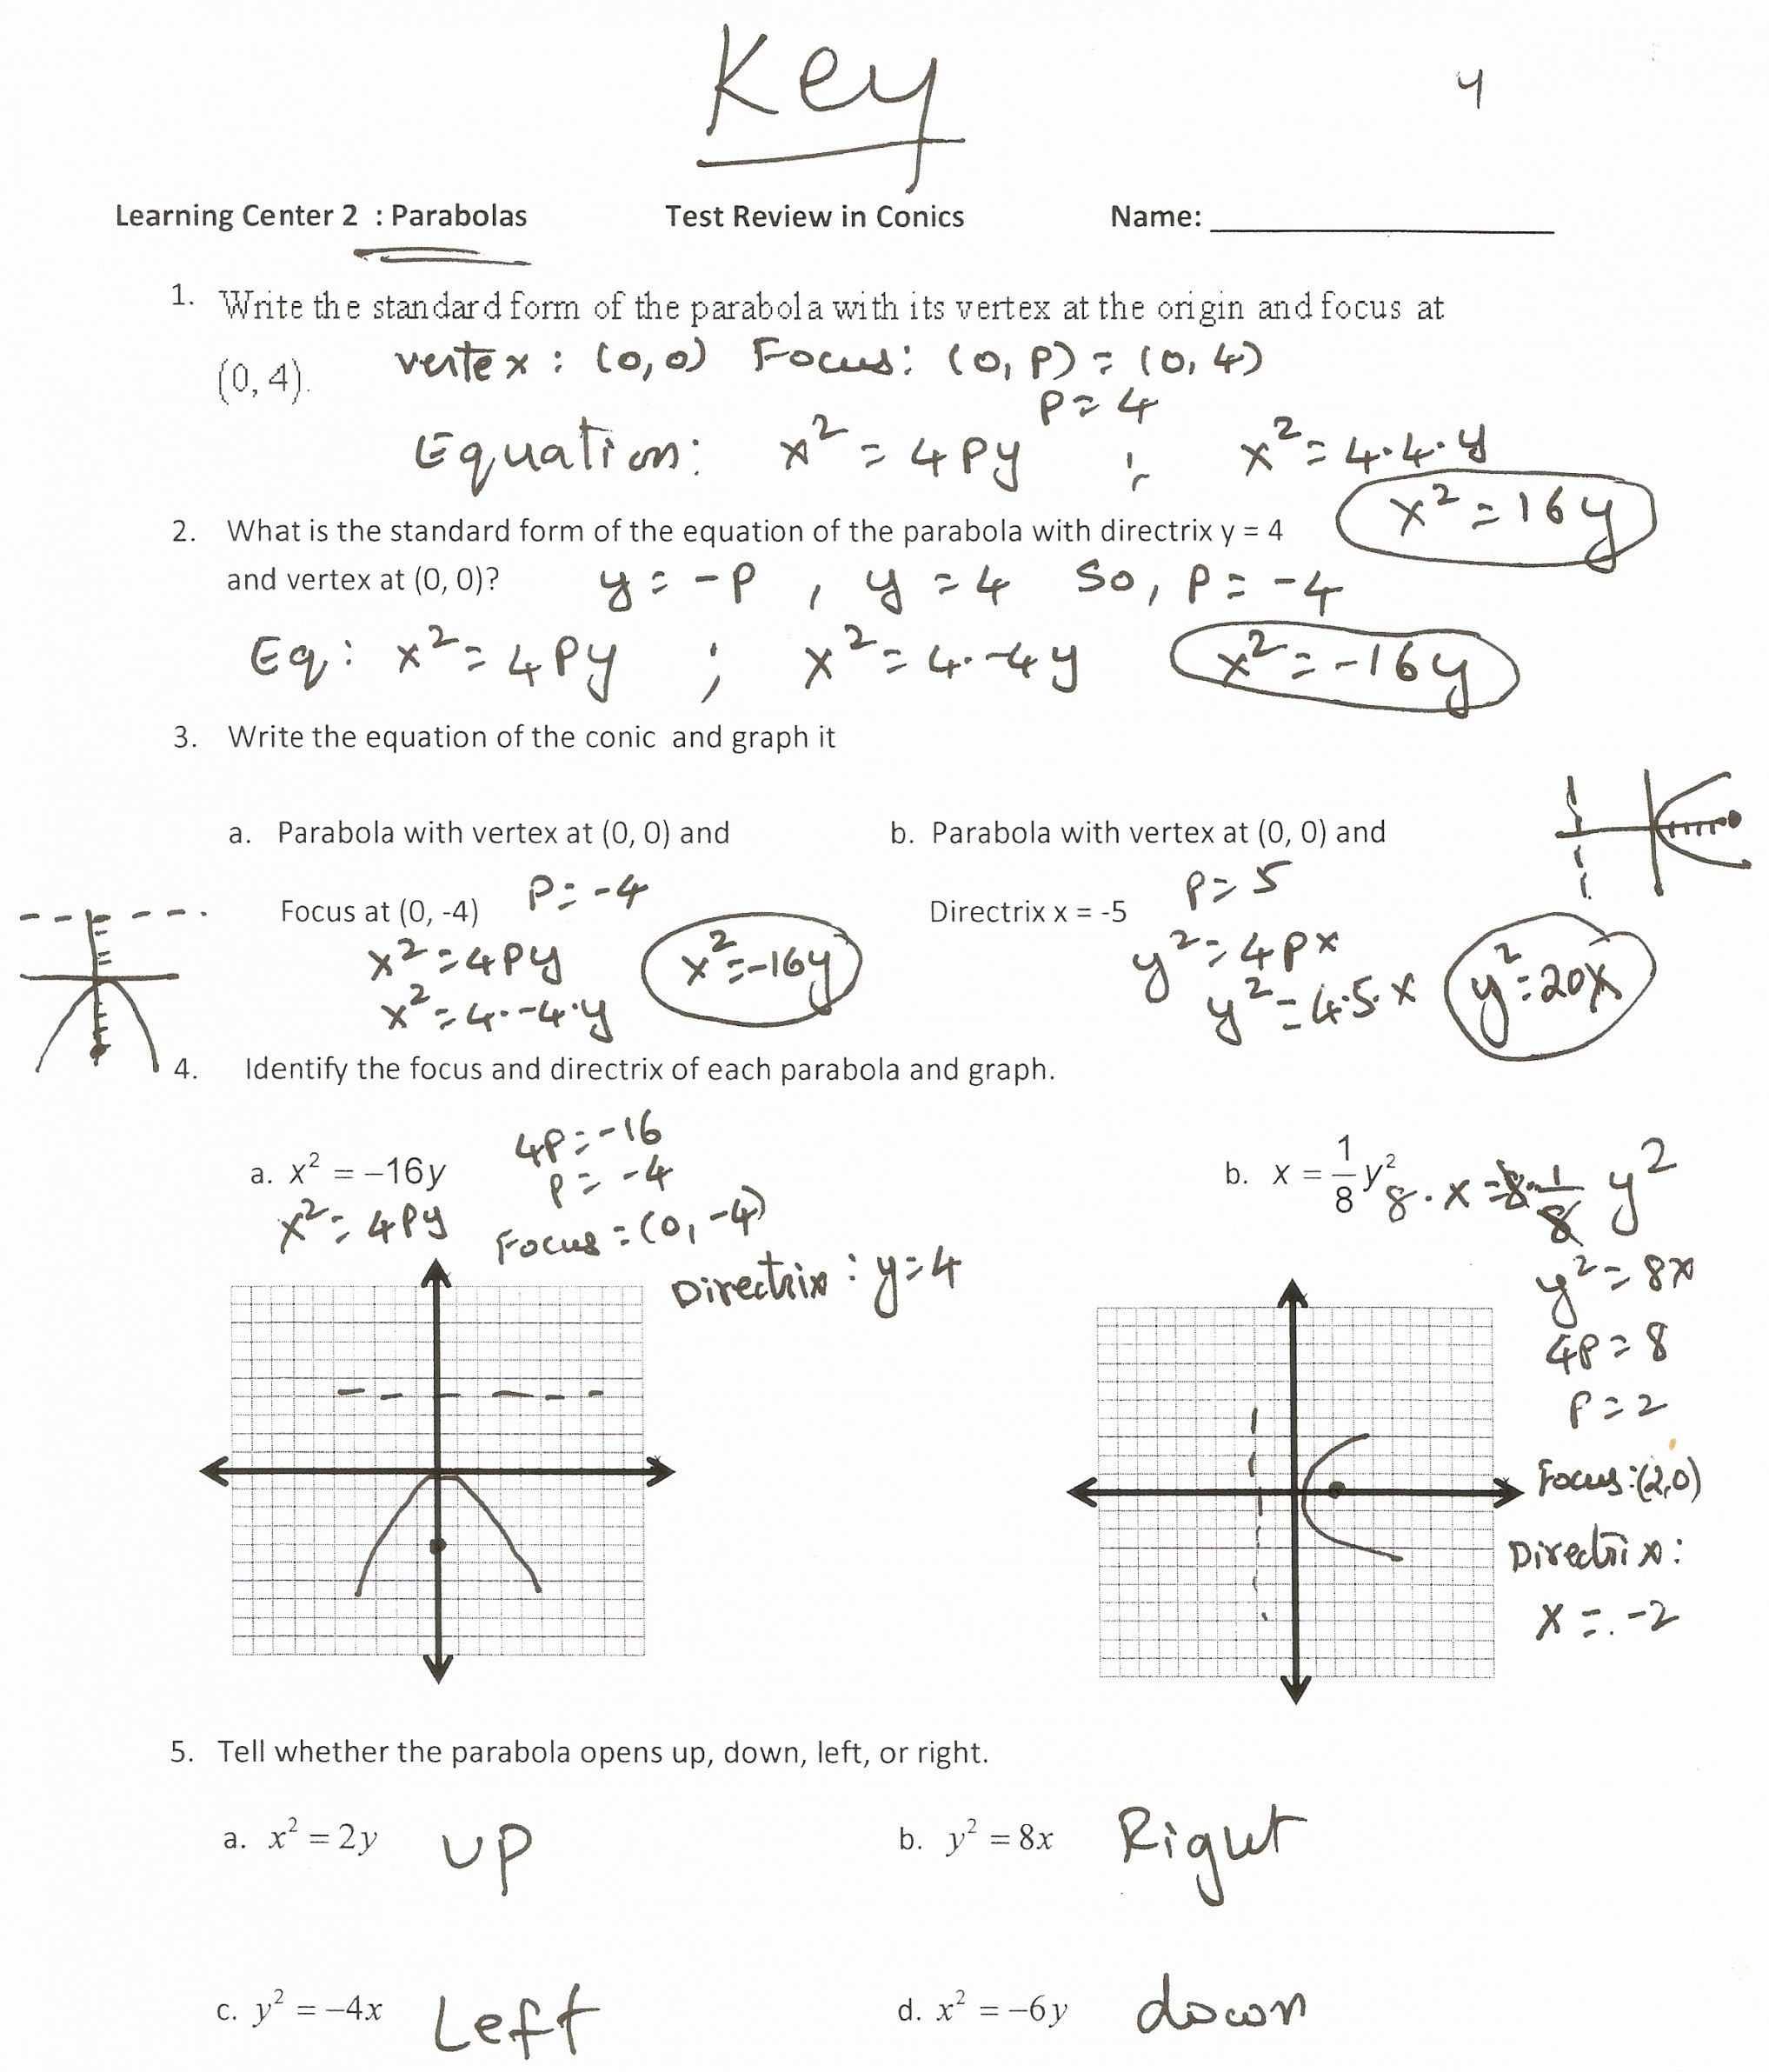 Point Slope Form Practice Worksheet Answers